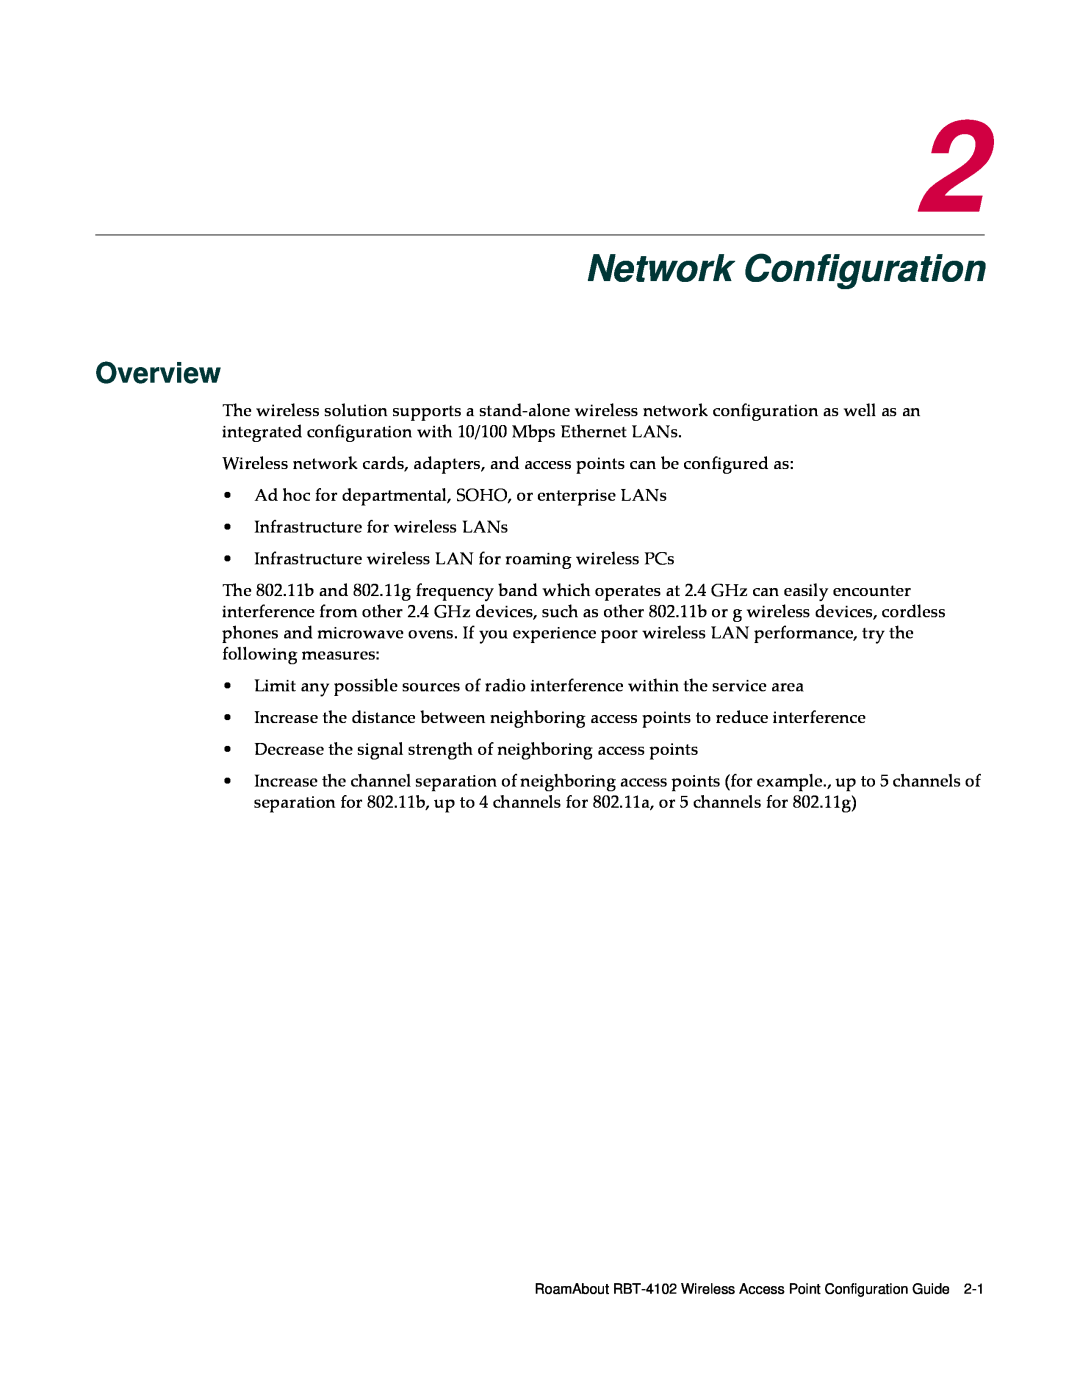 Enterasys Networks RBT-4102 manual Network Configuration, Overview 